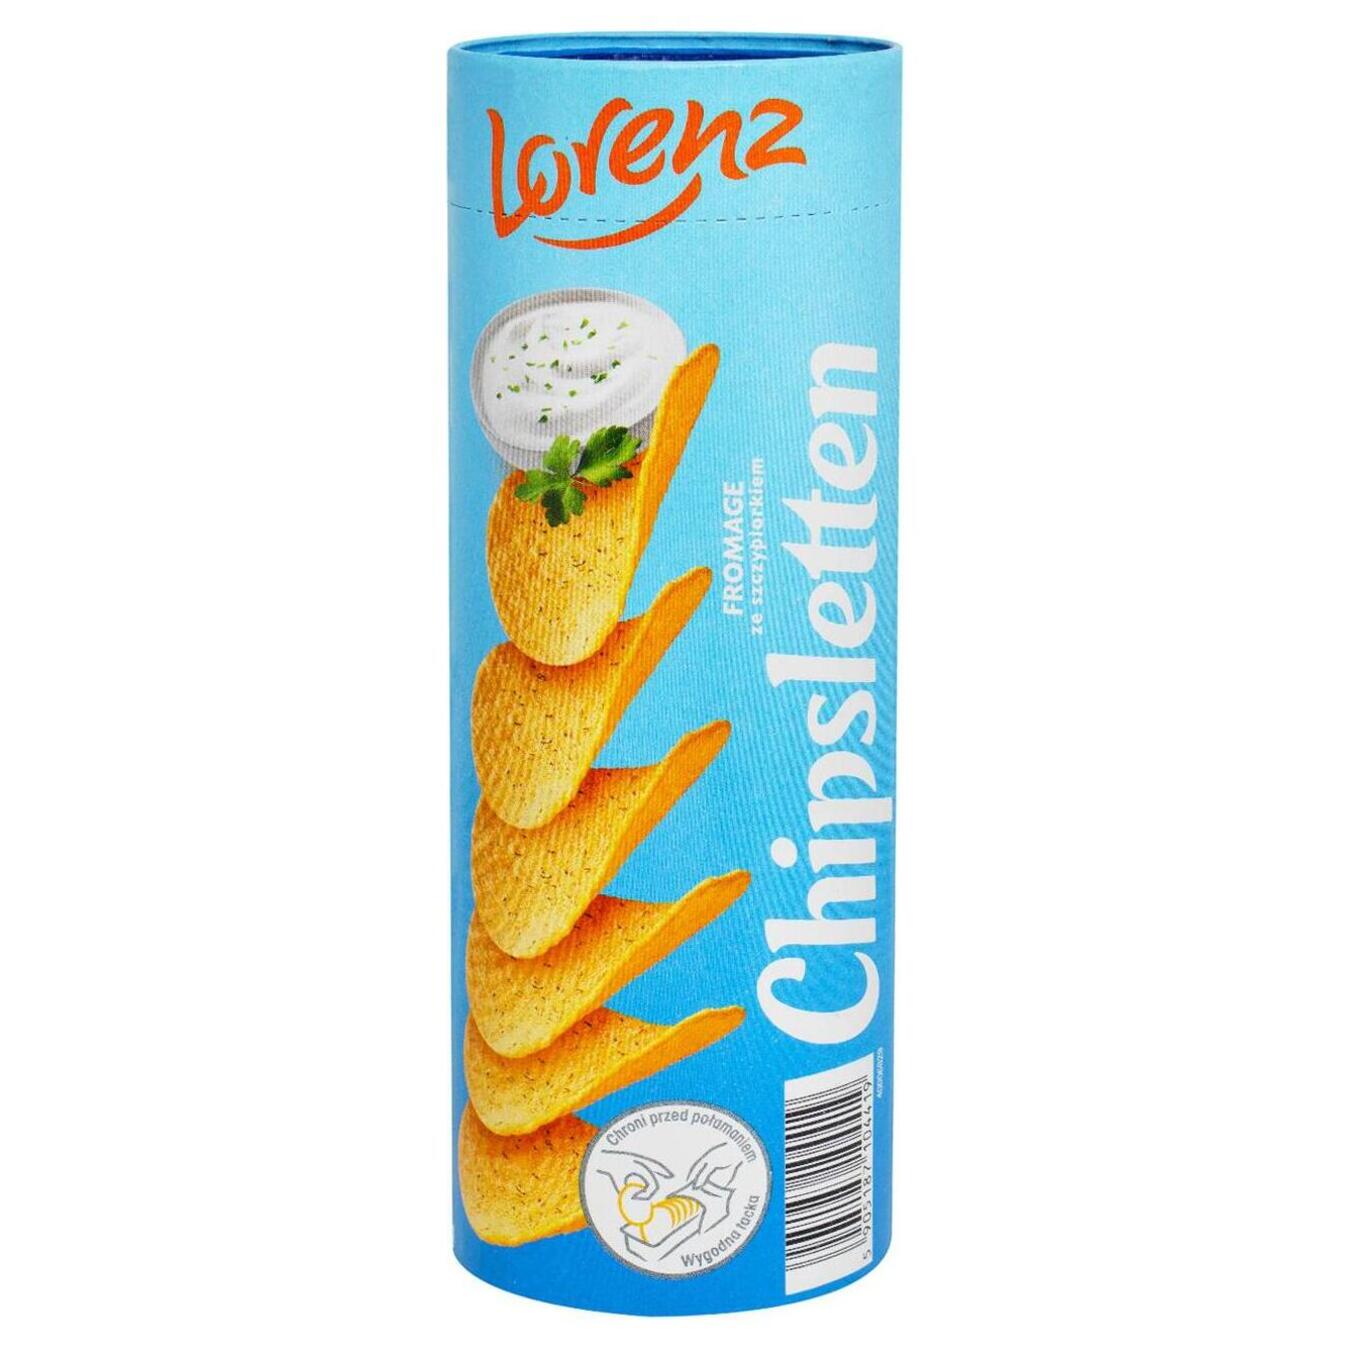 Lorenz potato chips with cheese flavor 100g